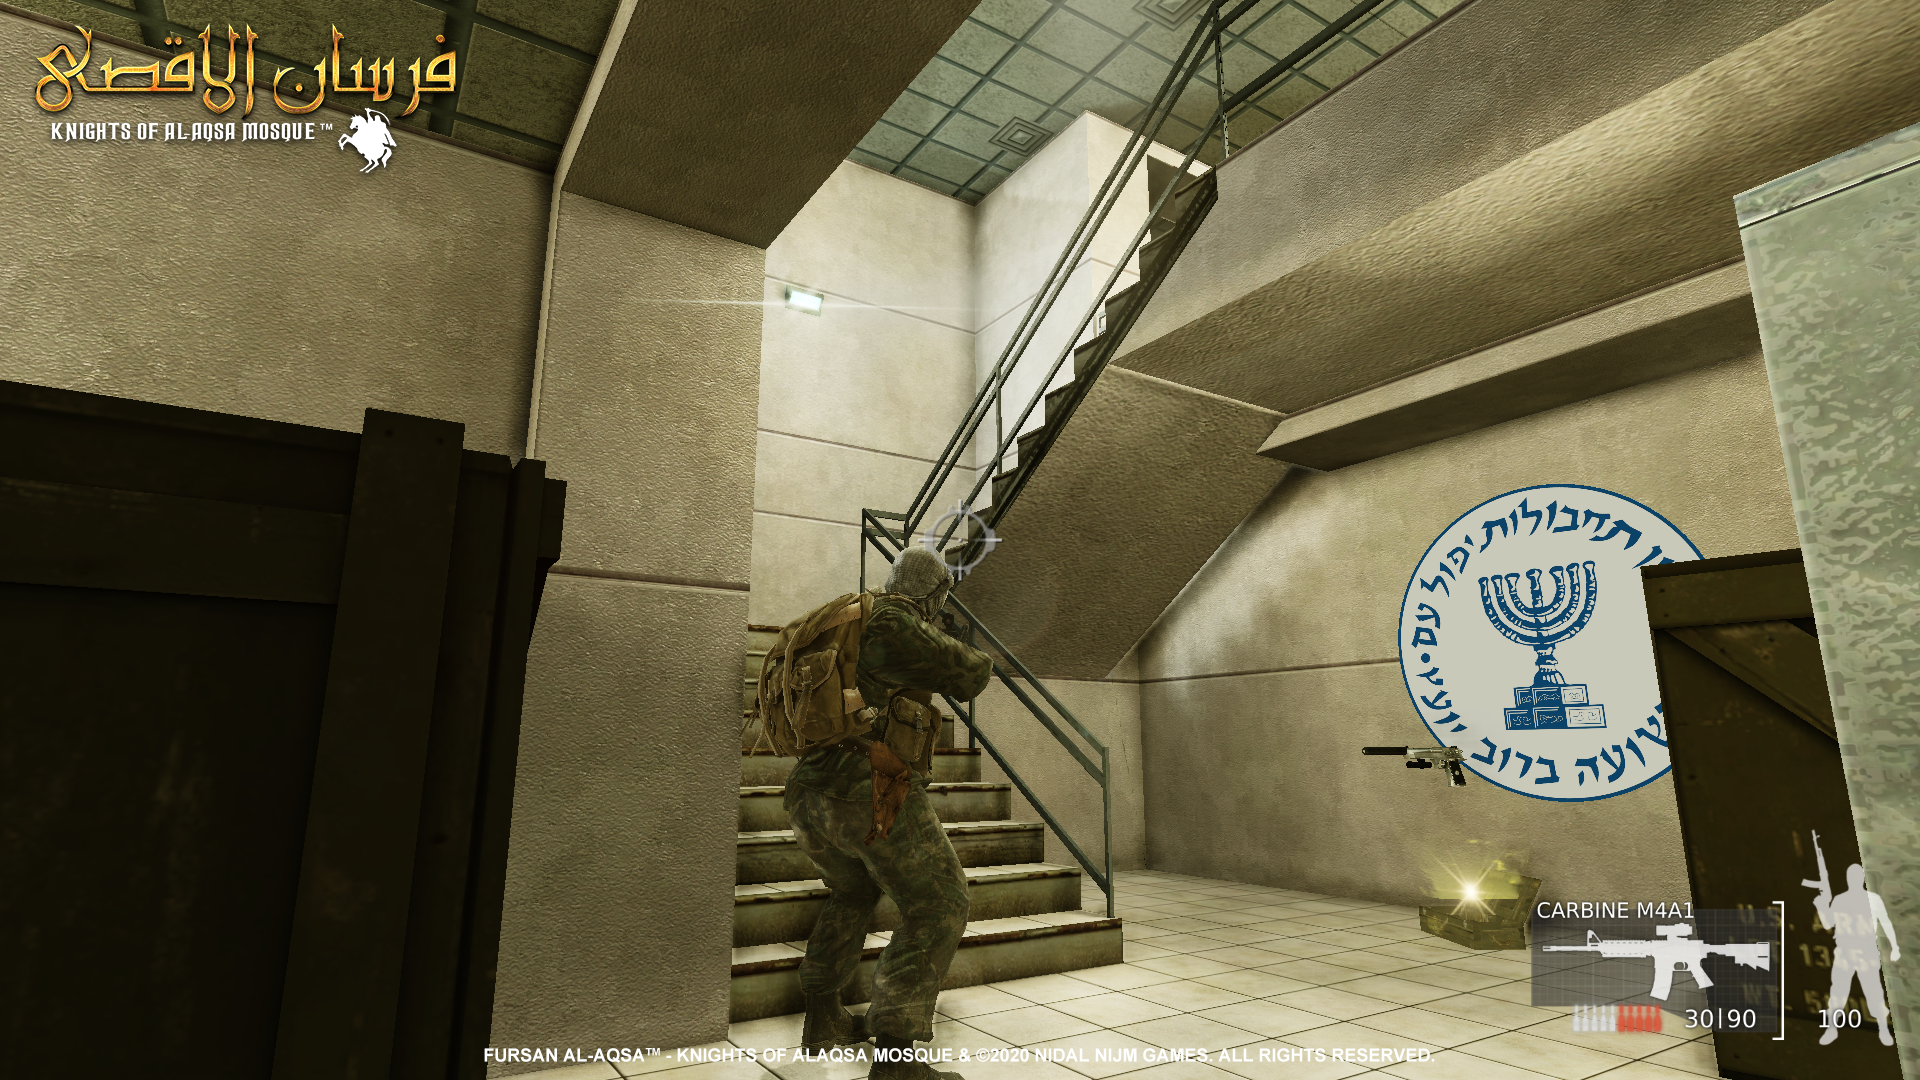 Fursan alAqsa  Showcase Mossad Office Up 1 - I am developing a game about Palestine Resistance